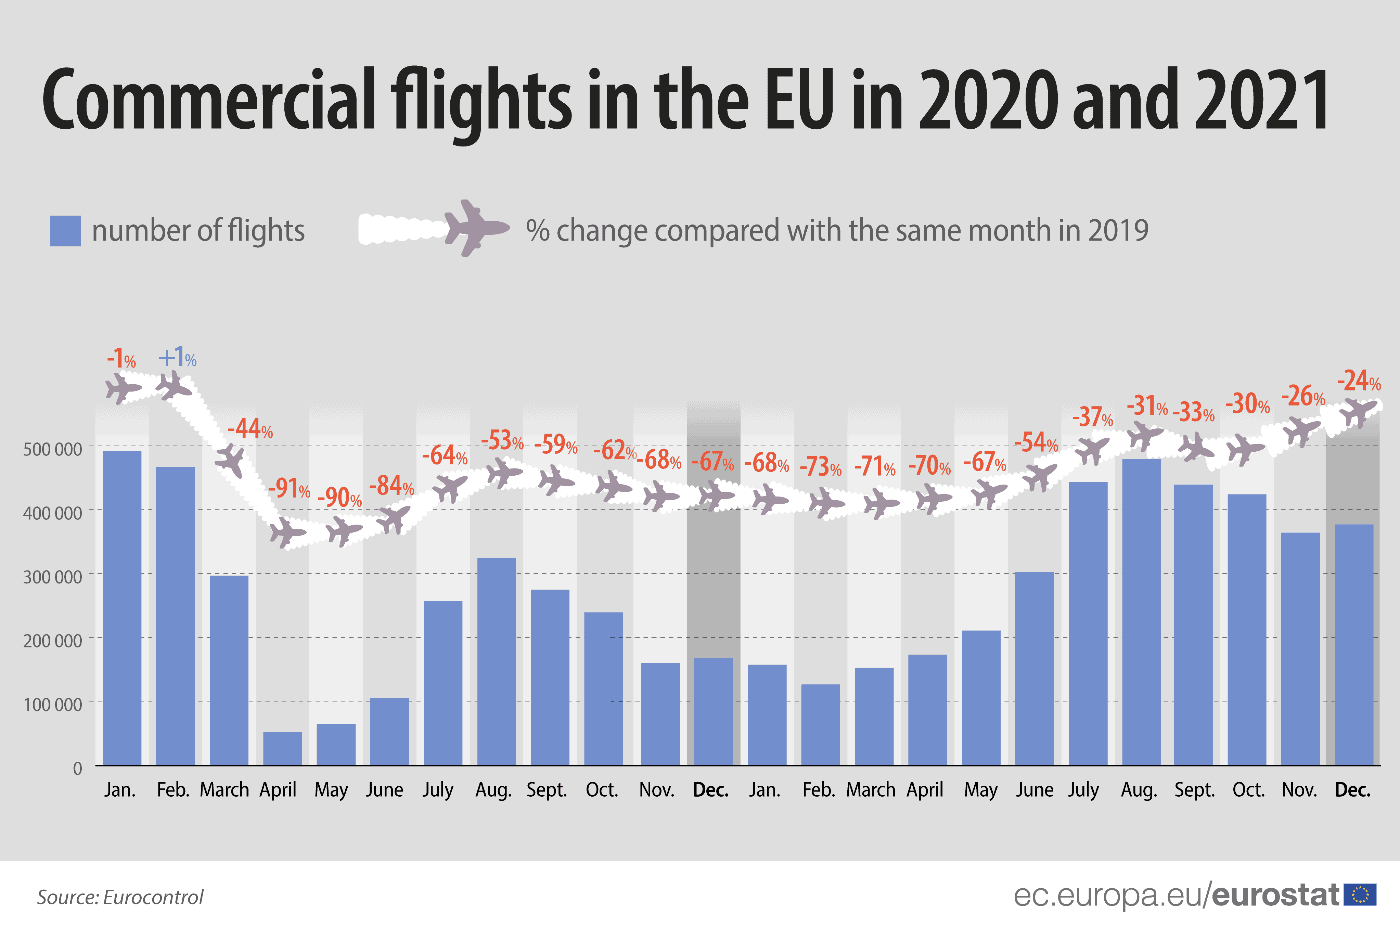 EU: Greece, Cyprus record lowest decreases in commercial flights 2